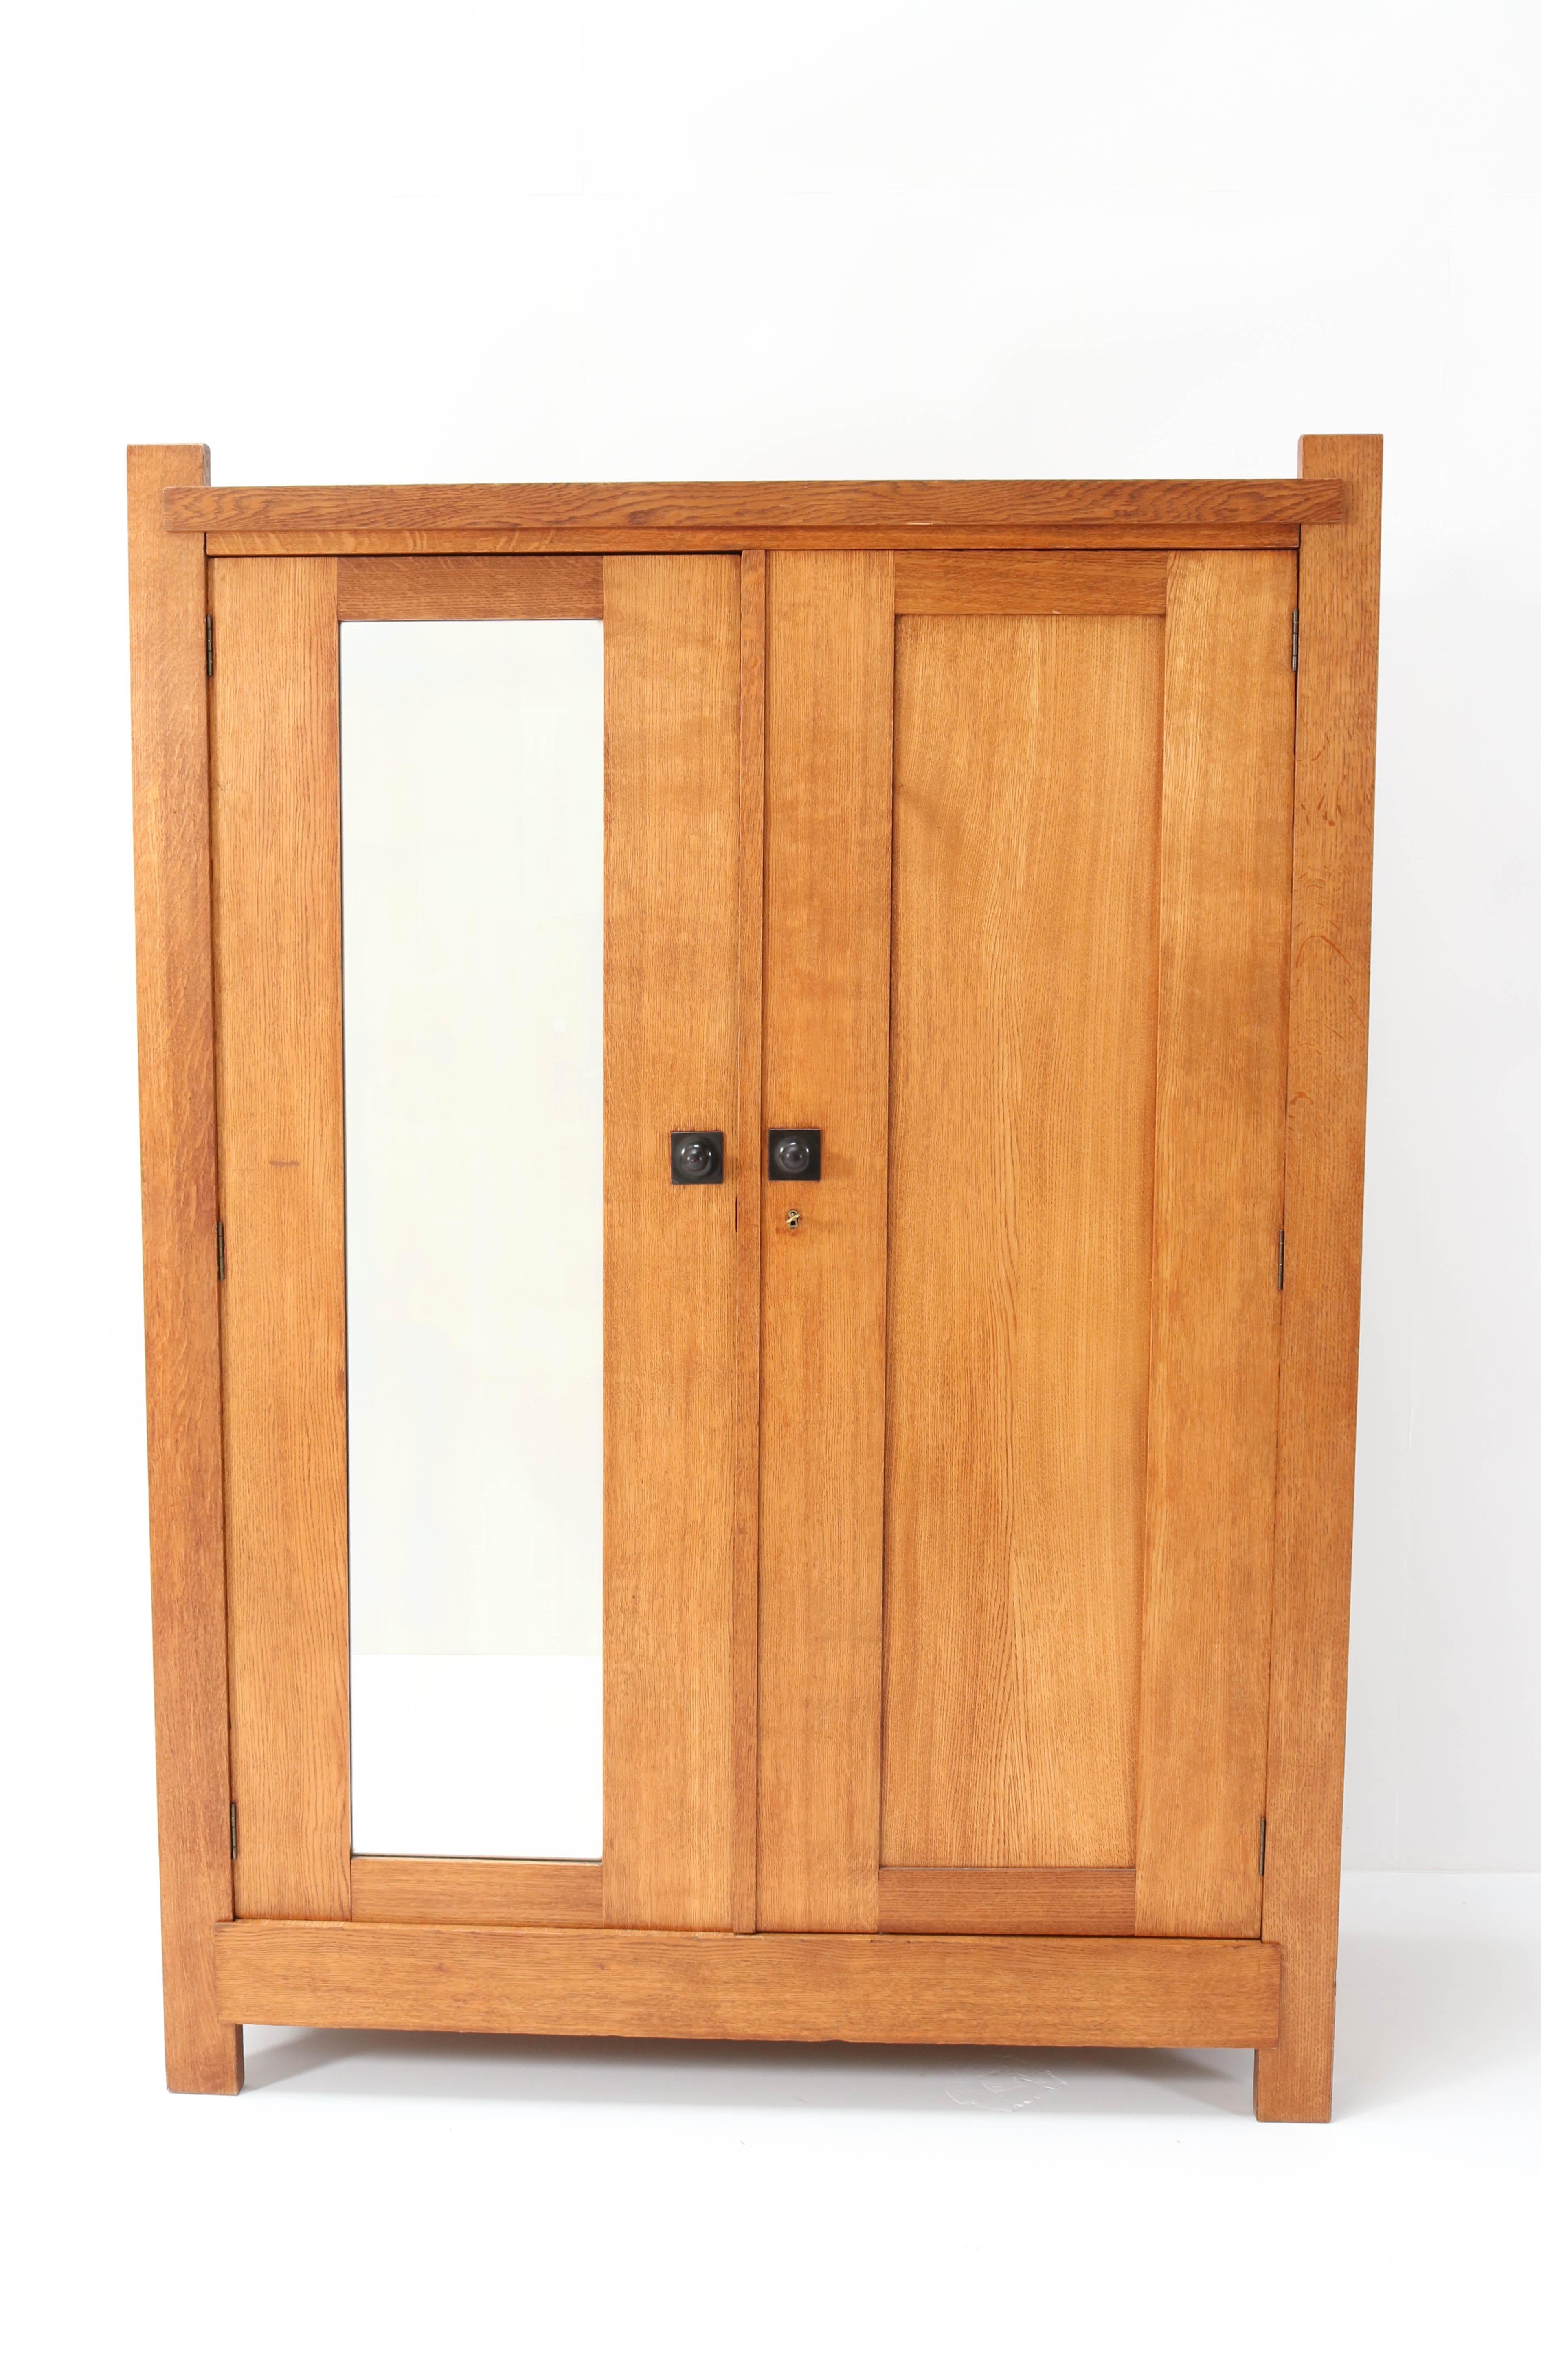 Stunning Art Deco Haagse School armoir or wardrobe.
Design by Hendrik Wouda for H. Pander & Zonen.
Striking Dutch design from the 1920s.
Solid oak with original black lacquered wooden knobs.
Marked with metal tag and brand mark and original Pander